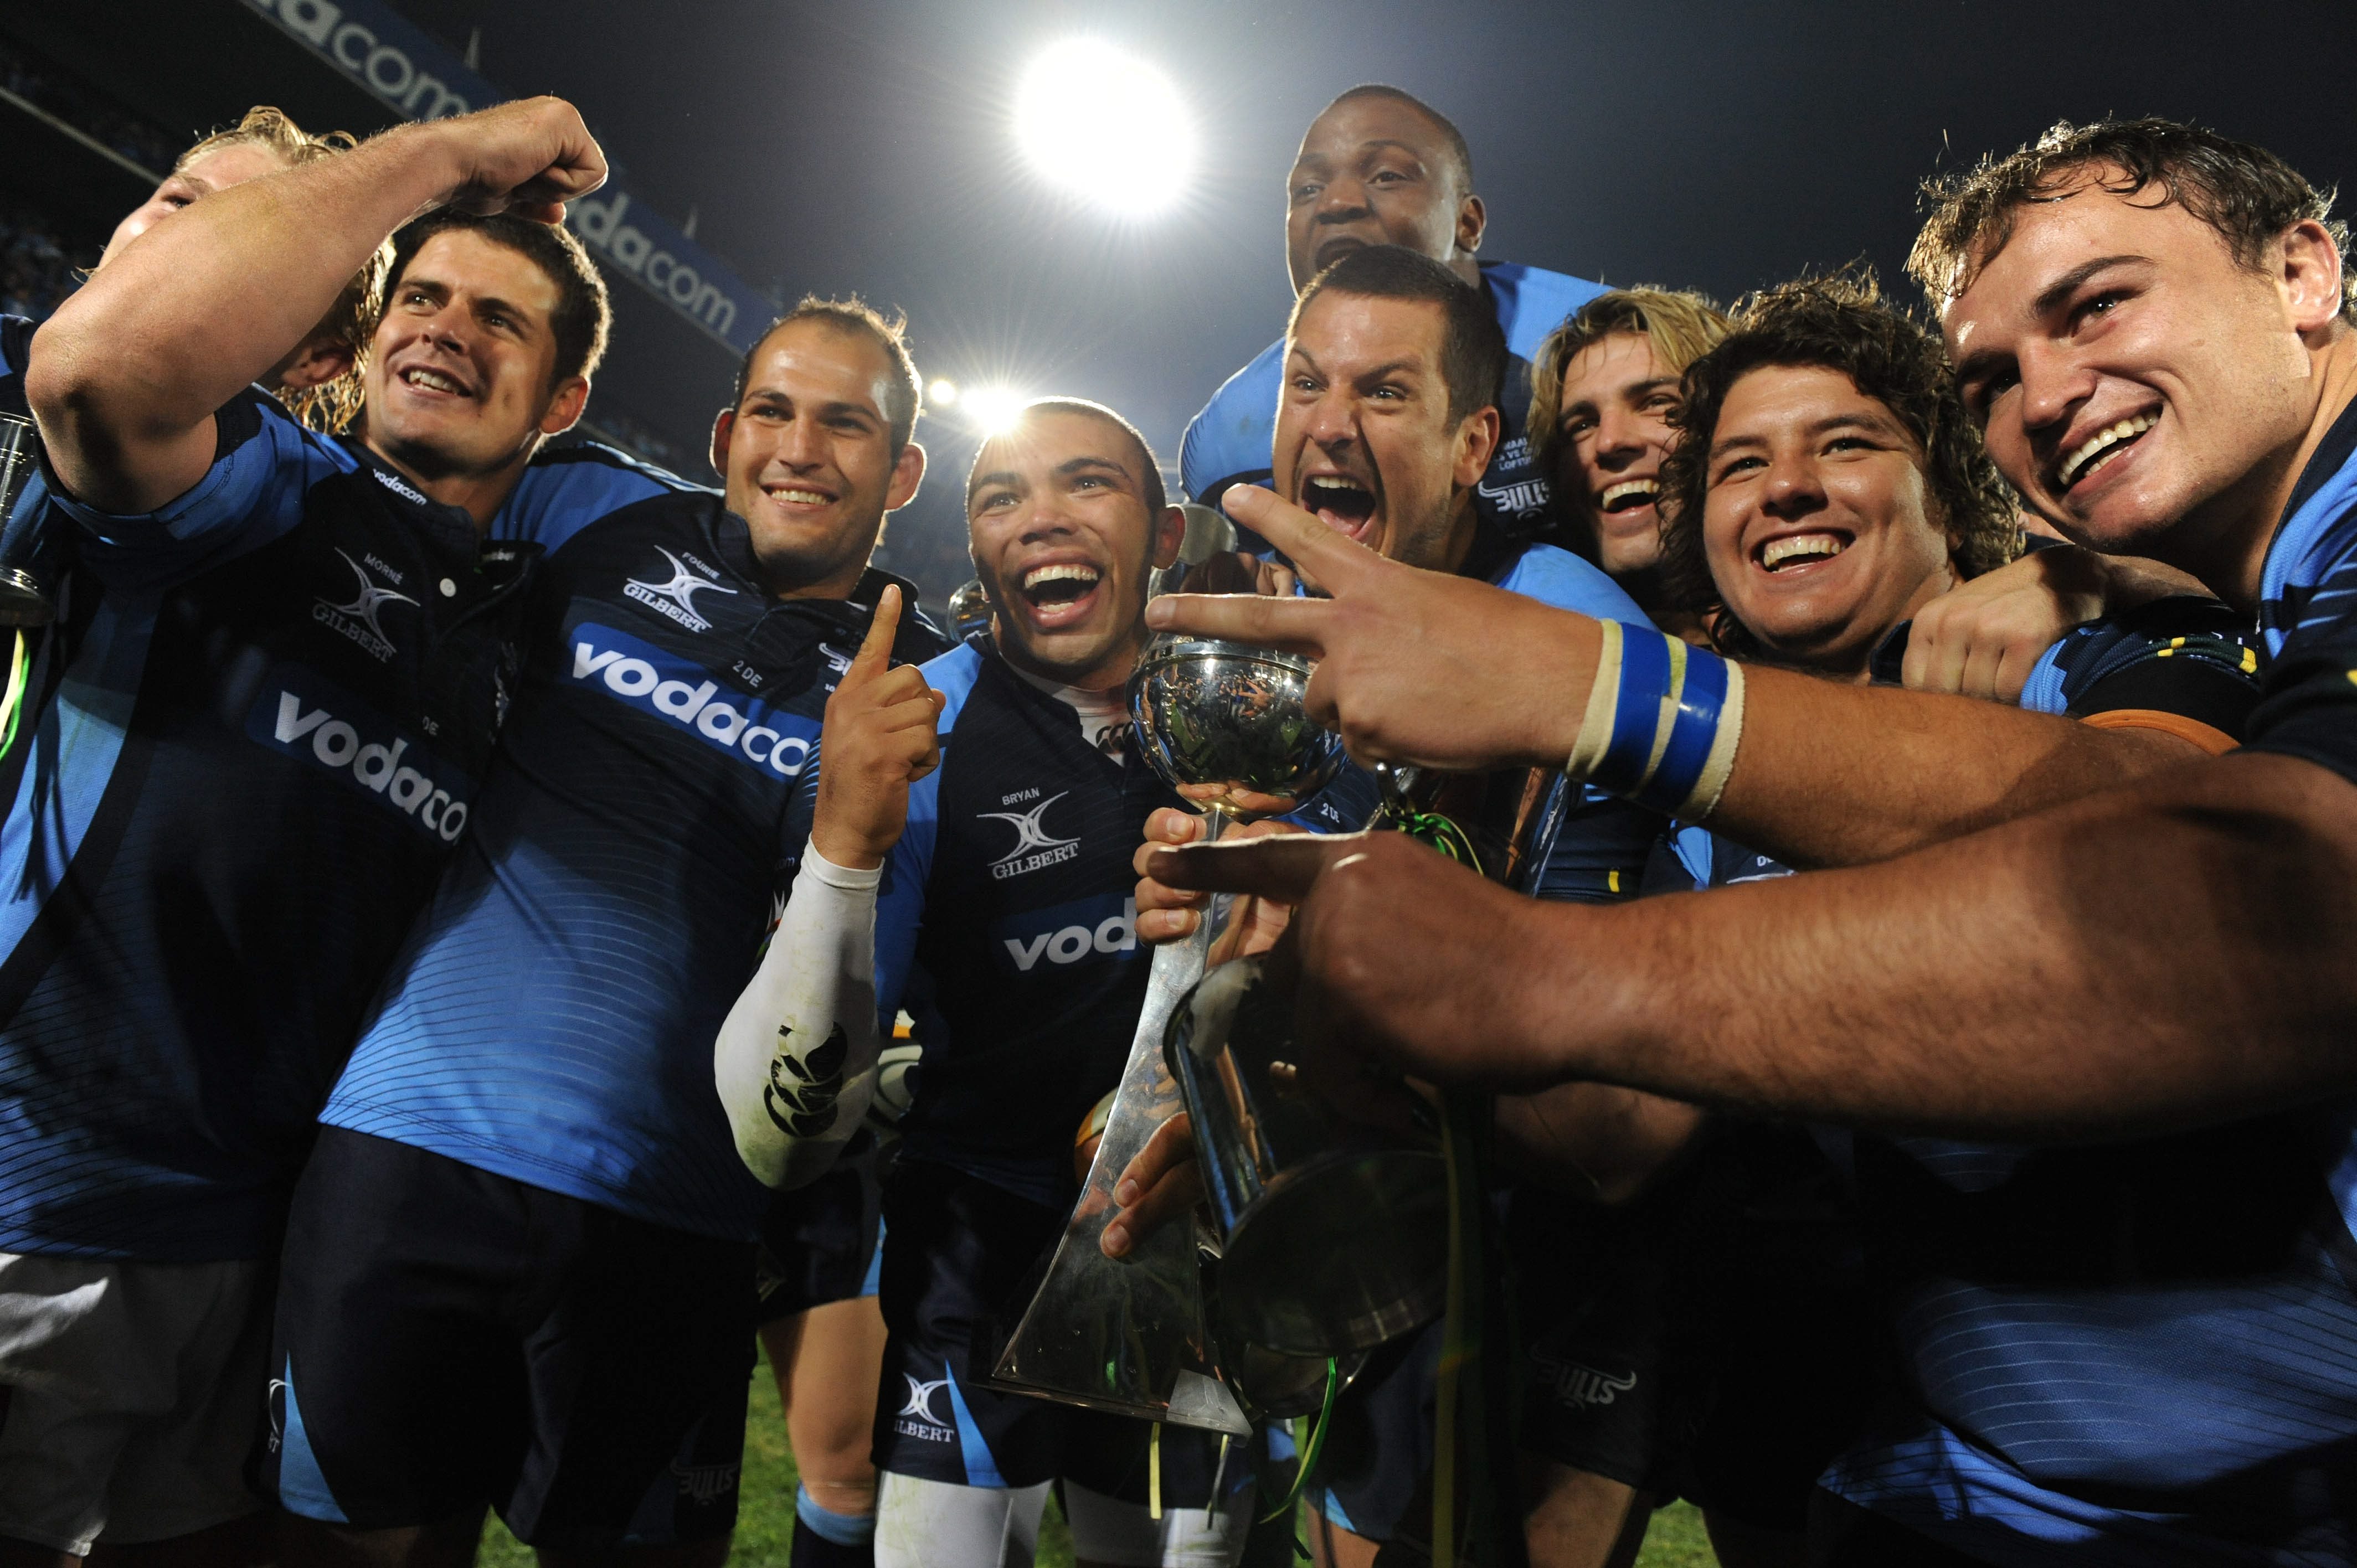 PRETORIA, SOUTH AFRICA - MAY 30, Vodacom Bulls players celebrate during the Super 14 final match between Vodacom Bulls and Chiefs from Loftus Versfeld Stadium on May 30, 2009, in Pretoria, South Africa. Photo by Lefty Shivambu / Gallo Images